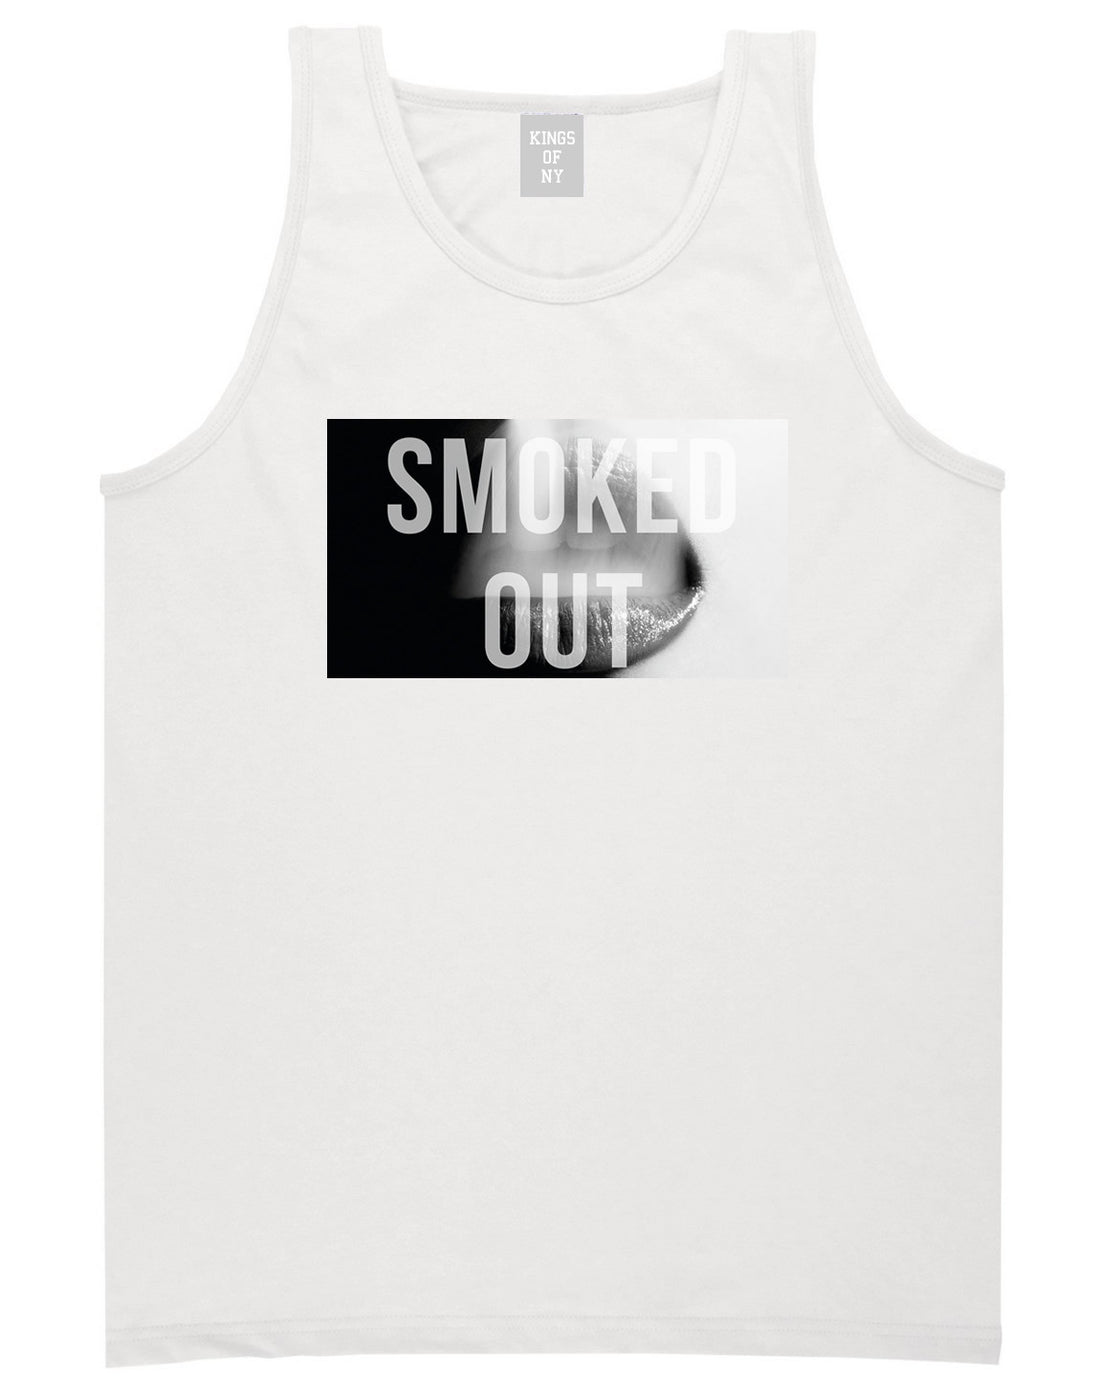 Smoked Out Weed Marijuana Girls Pot New York Tank Top In White by Kings Of NY